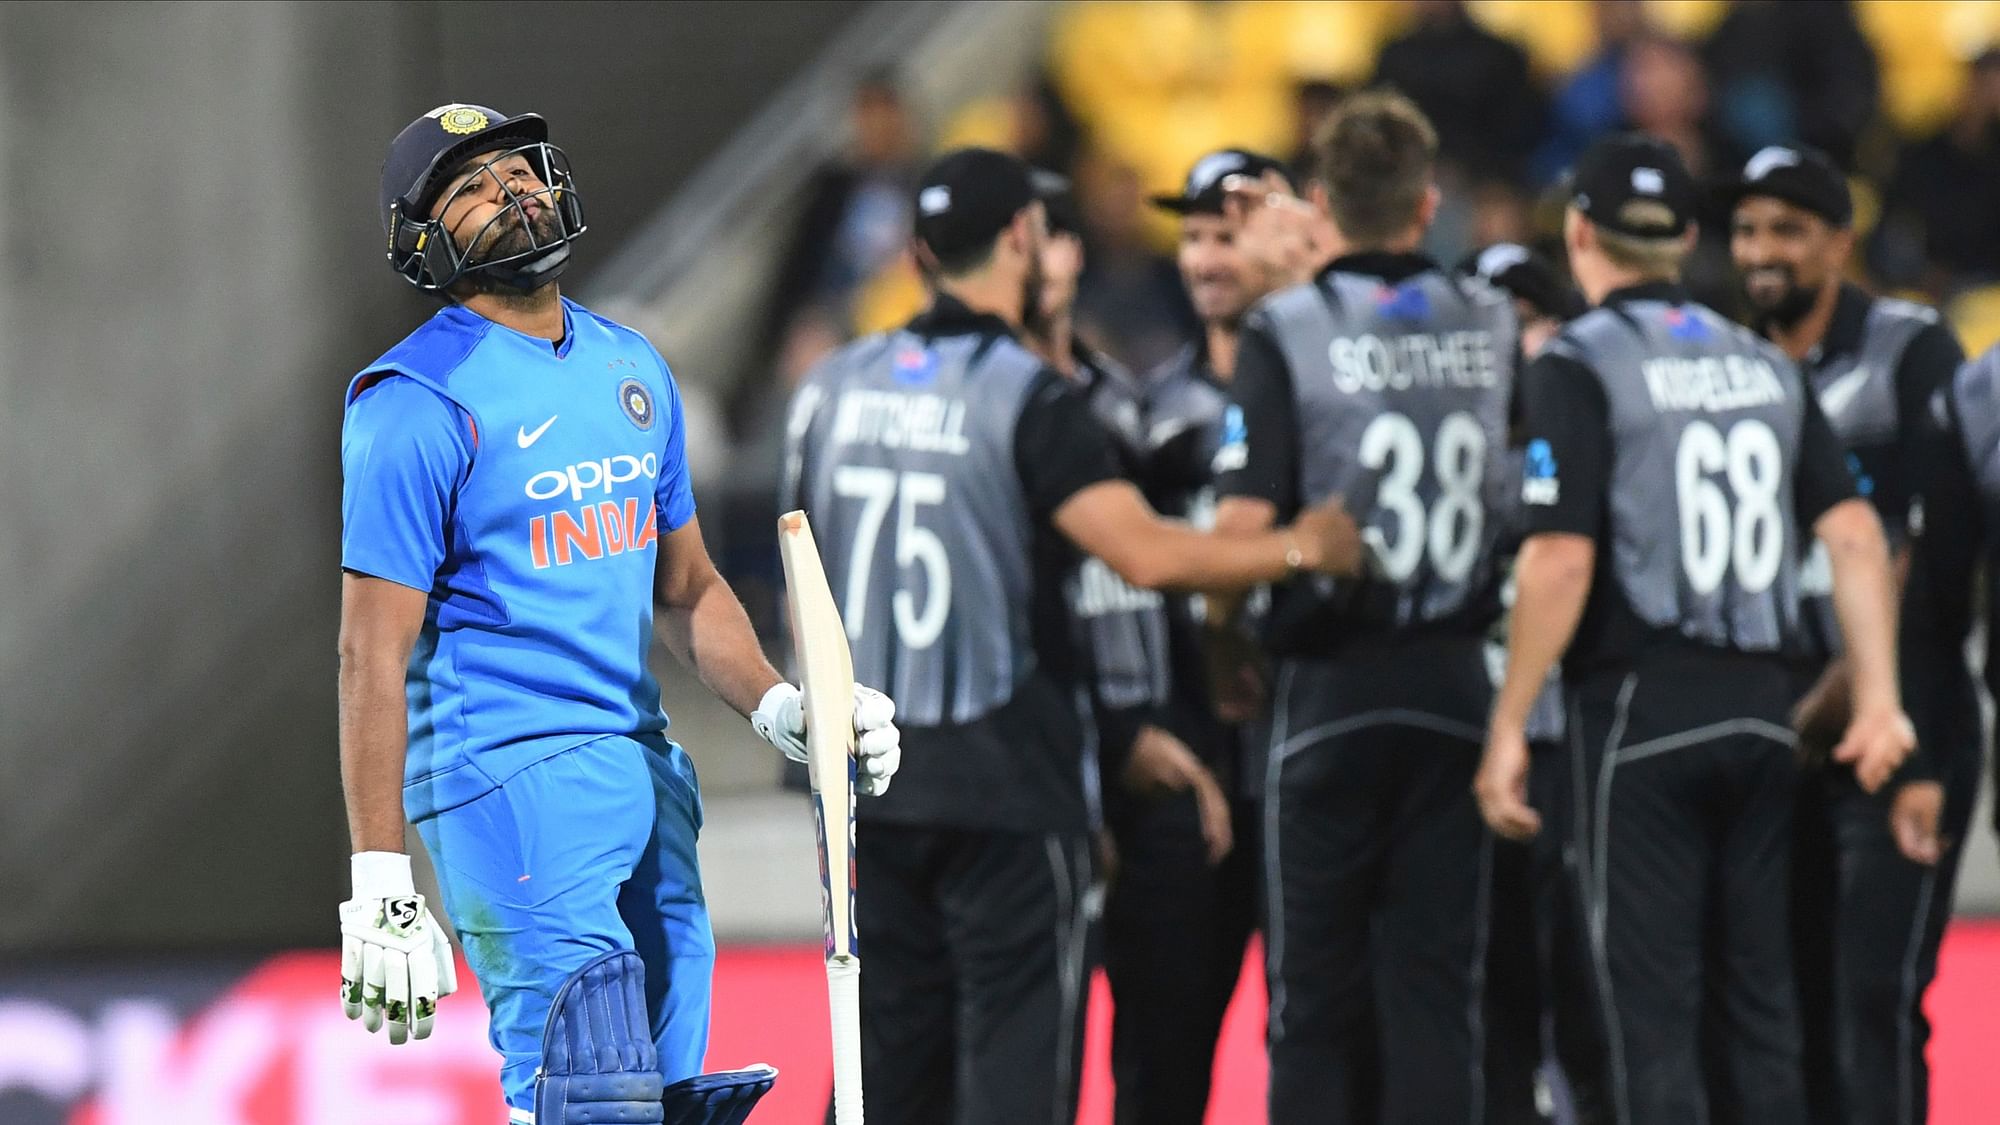 A dejected Rohit Sharma walks off after being dismissed for 1 in the first T20I between New Zealand and India at Wellington.